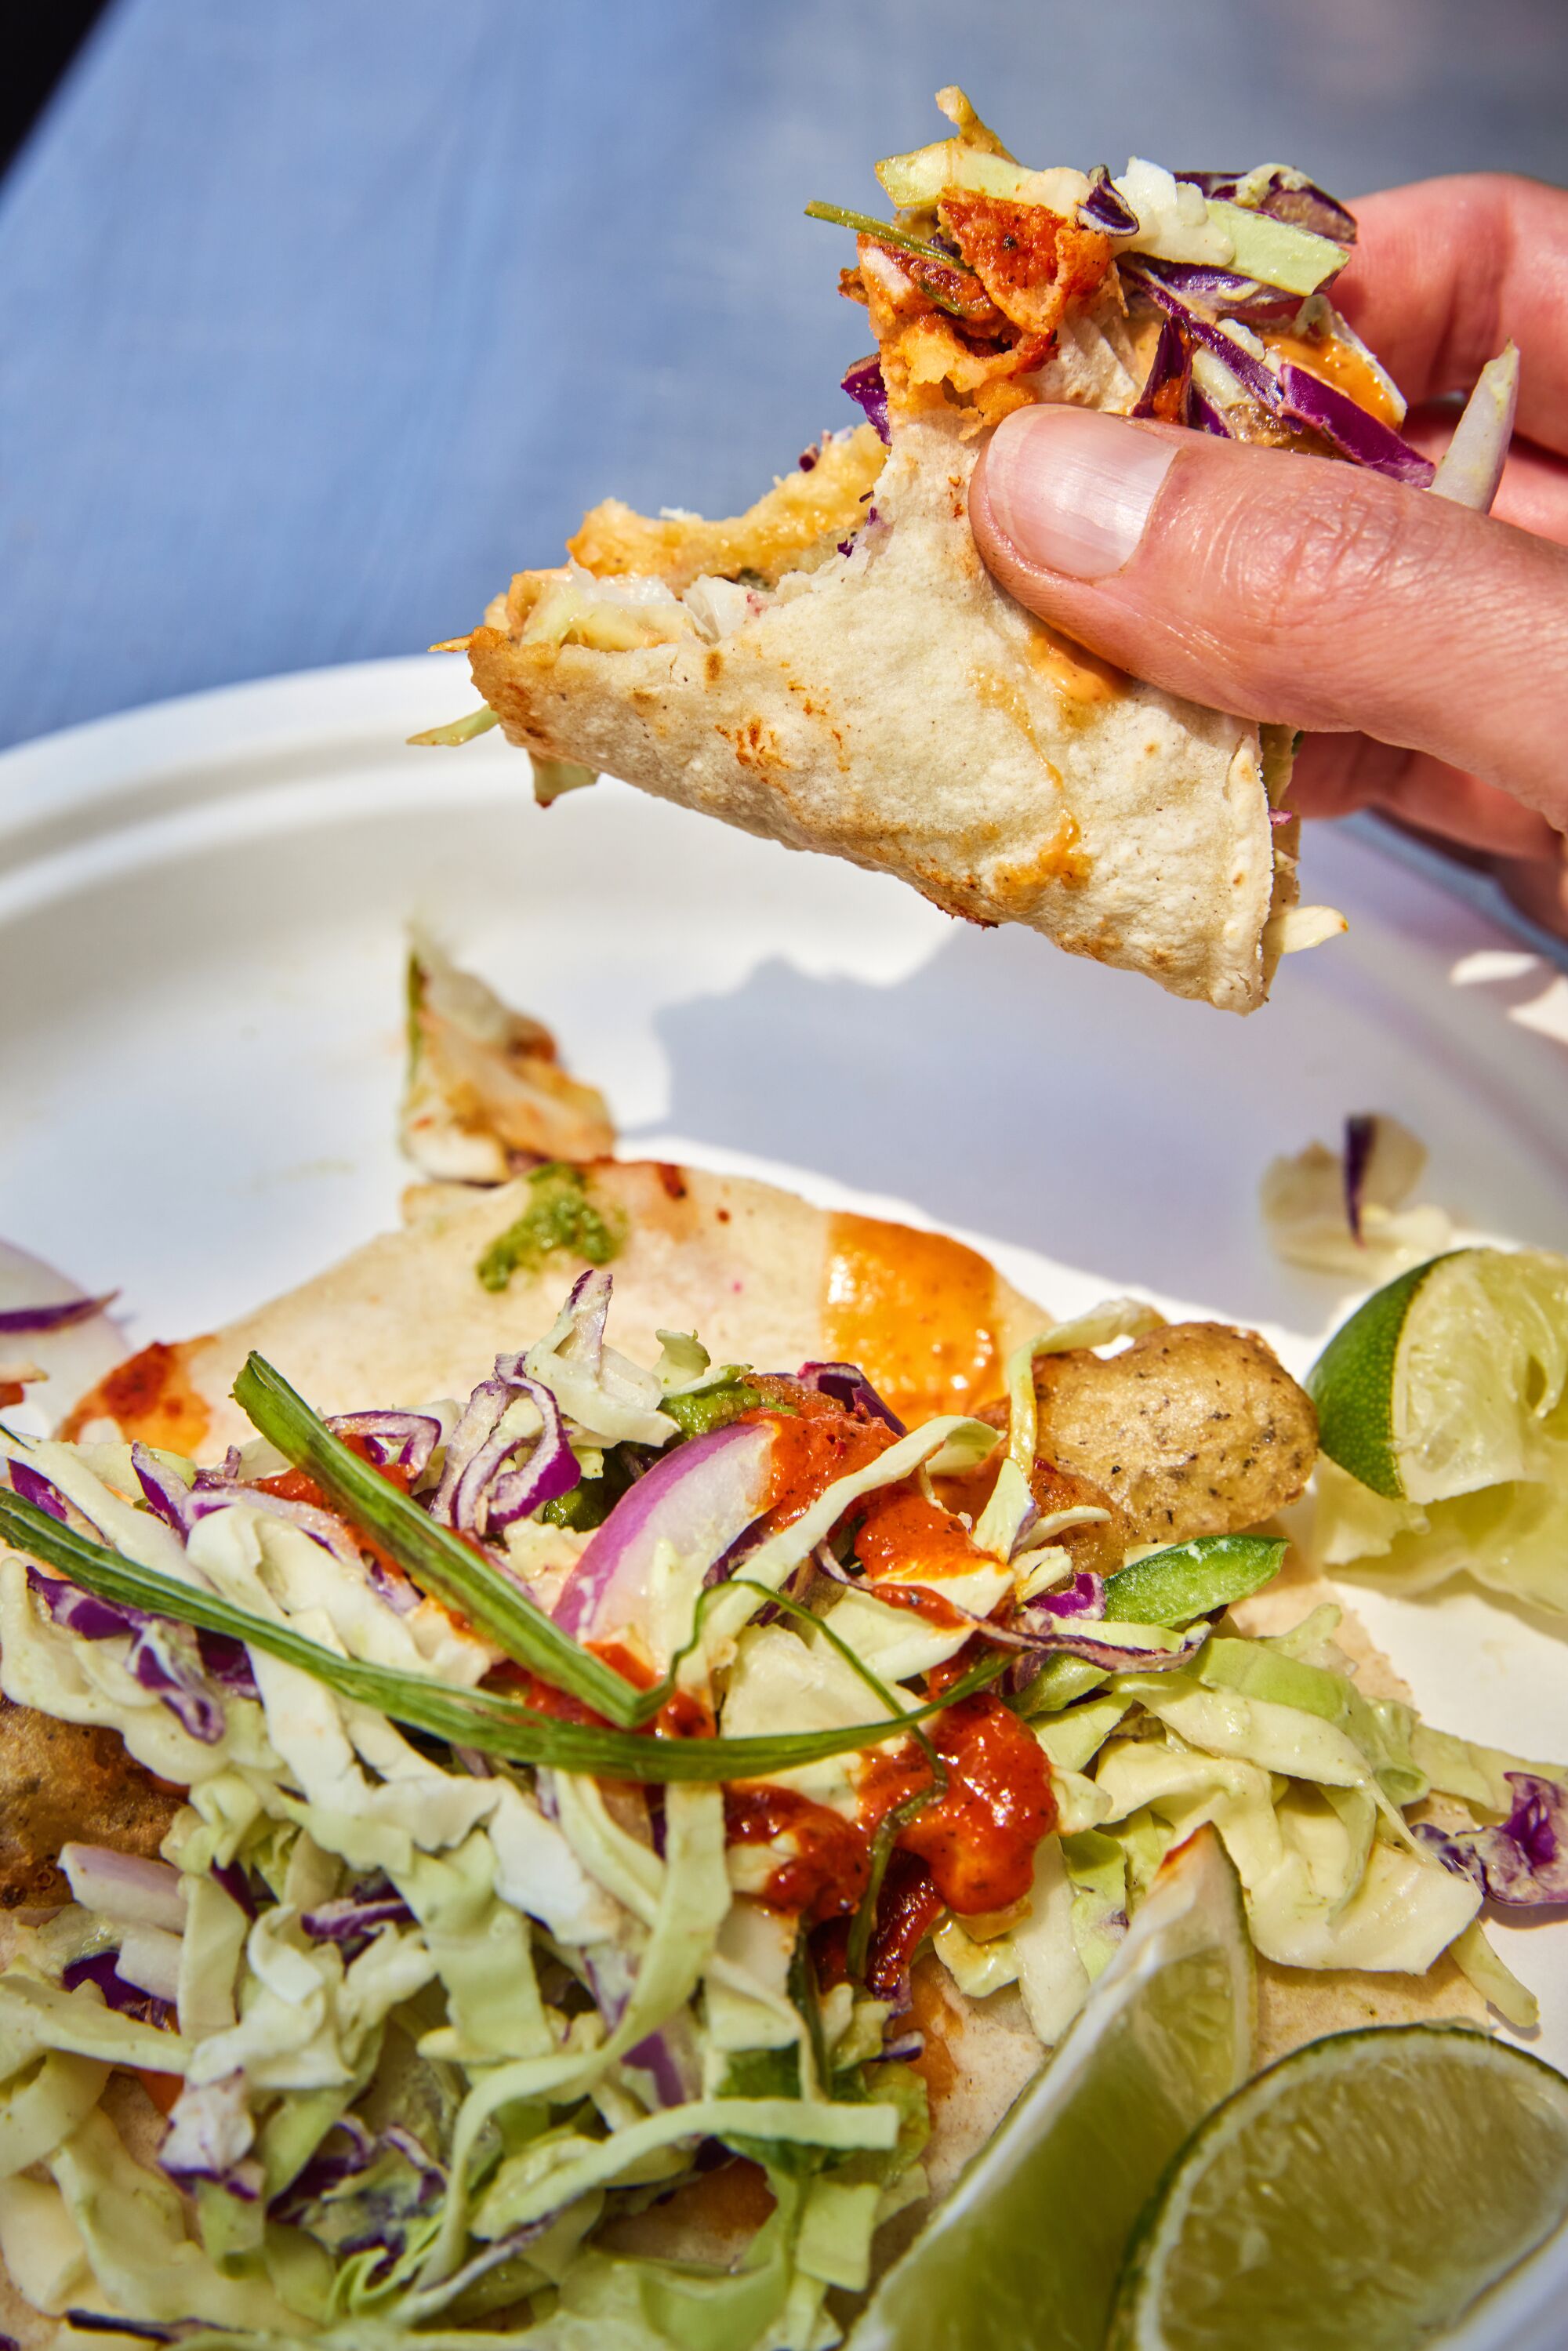 A hand holds a piece of fish taco above a plate.